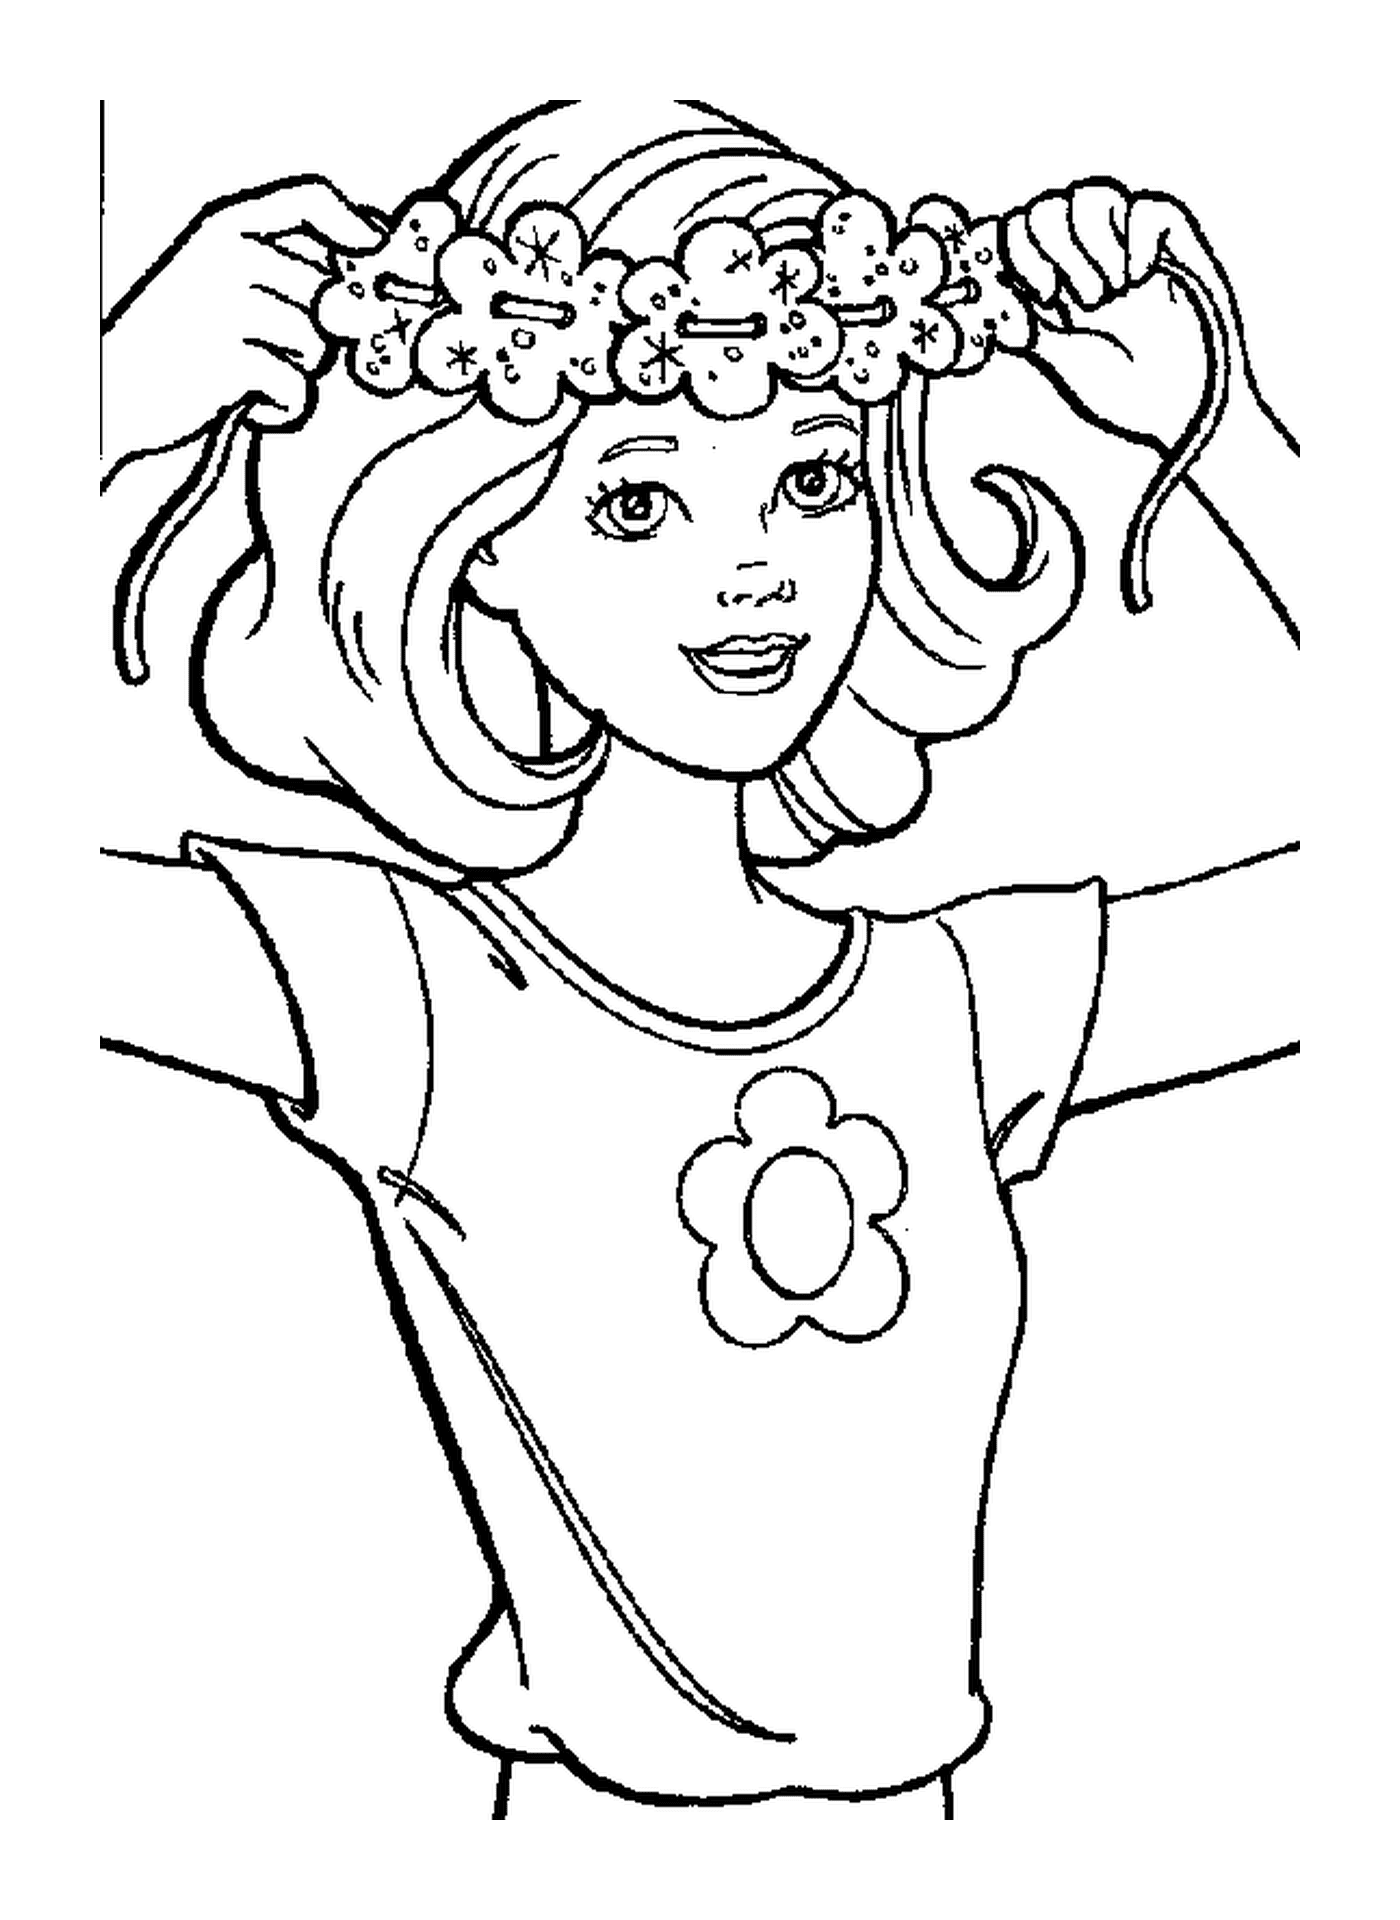  Barbie with a crown of flowers 